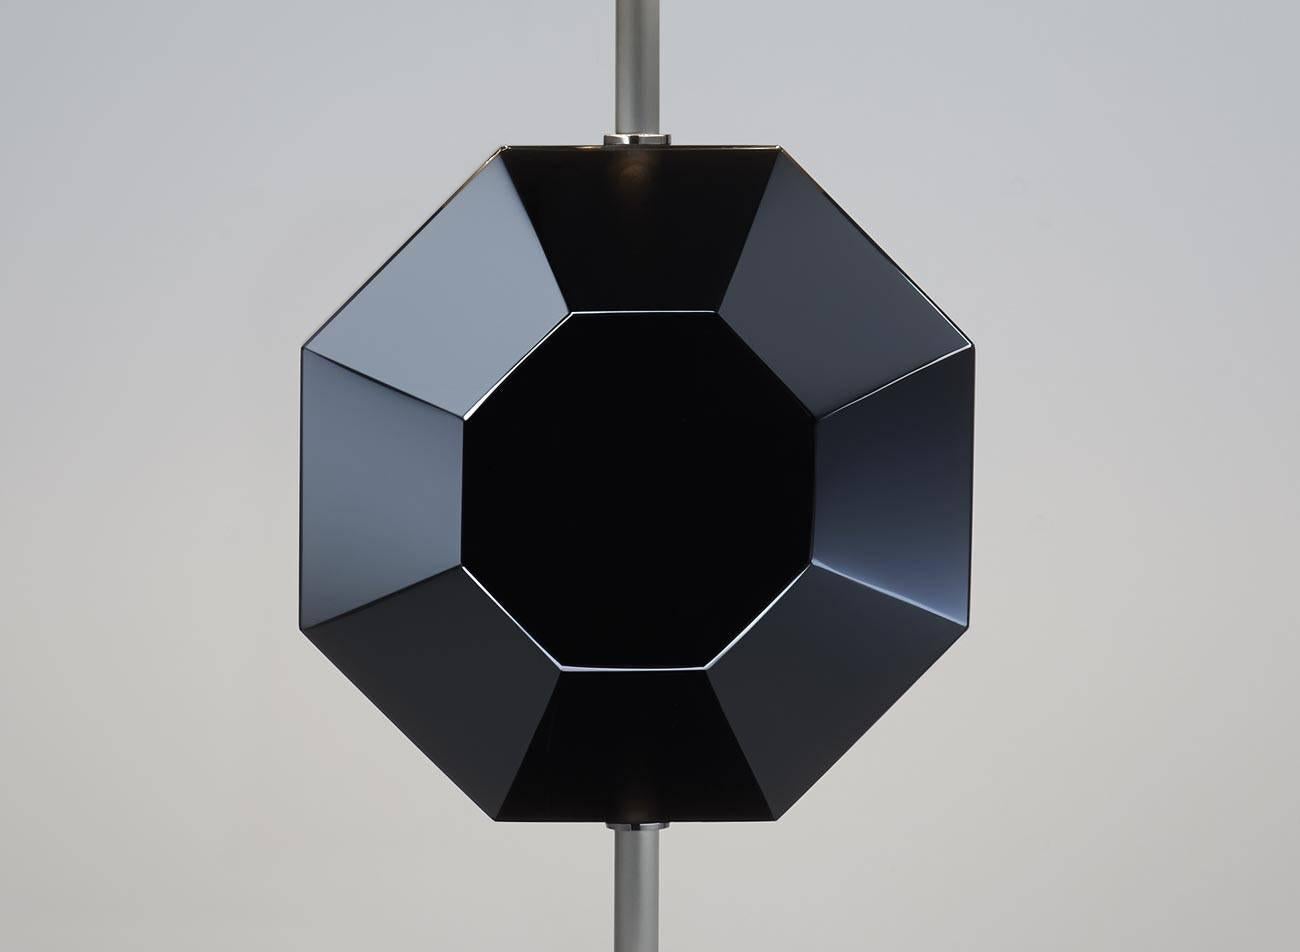 Octagonal table lamp, prototype
Made by Charles Paris
Made of brass and Armenian stone.
   